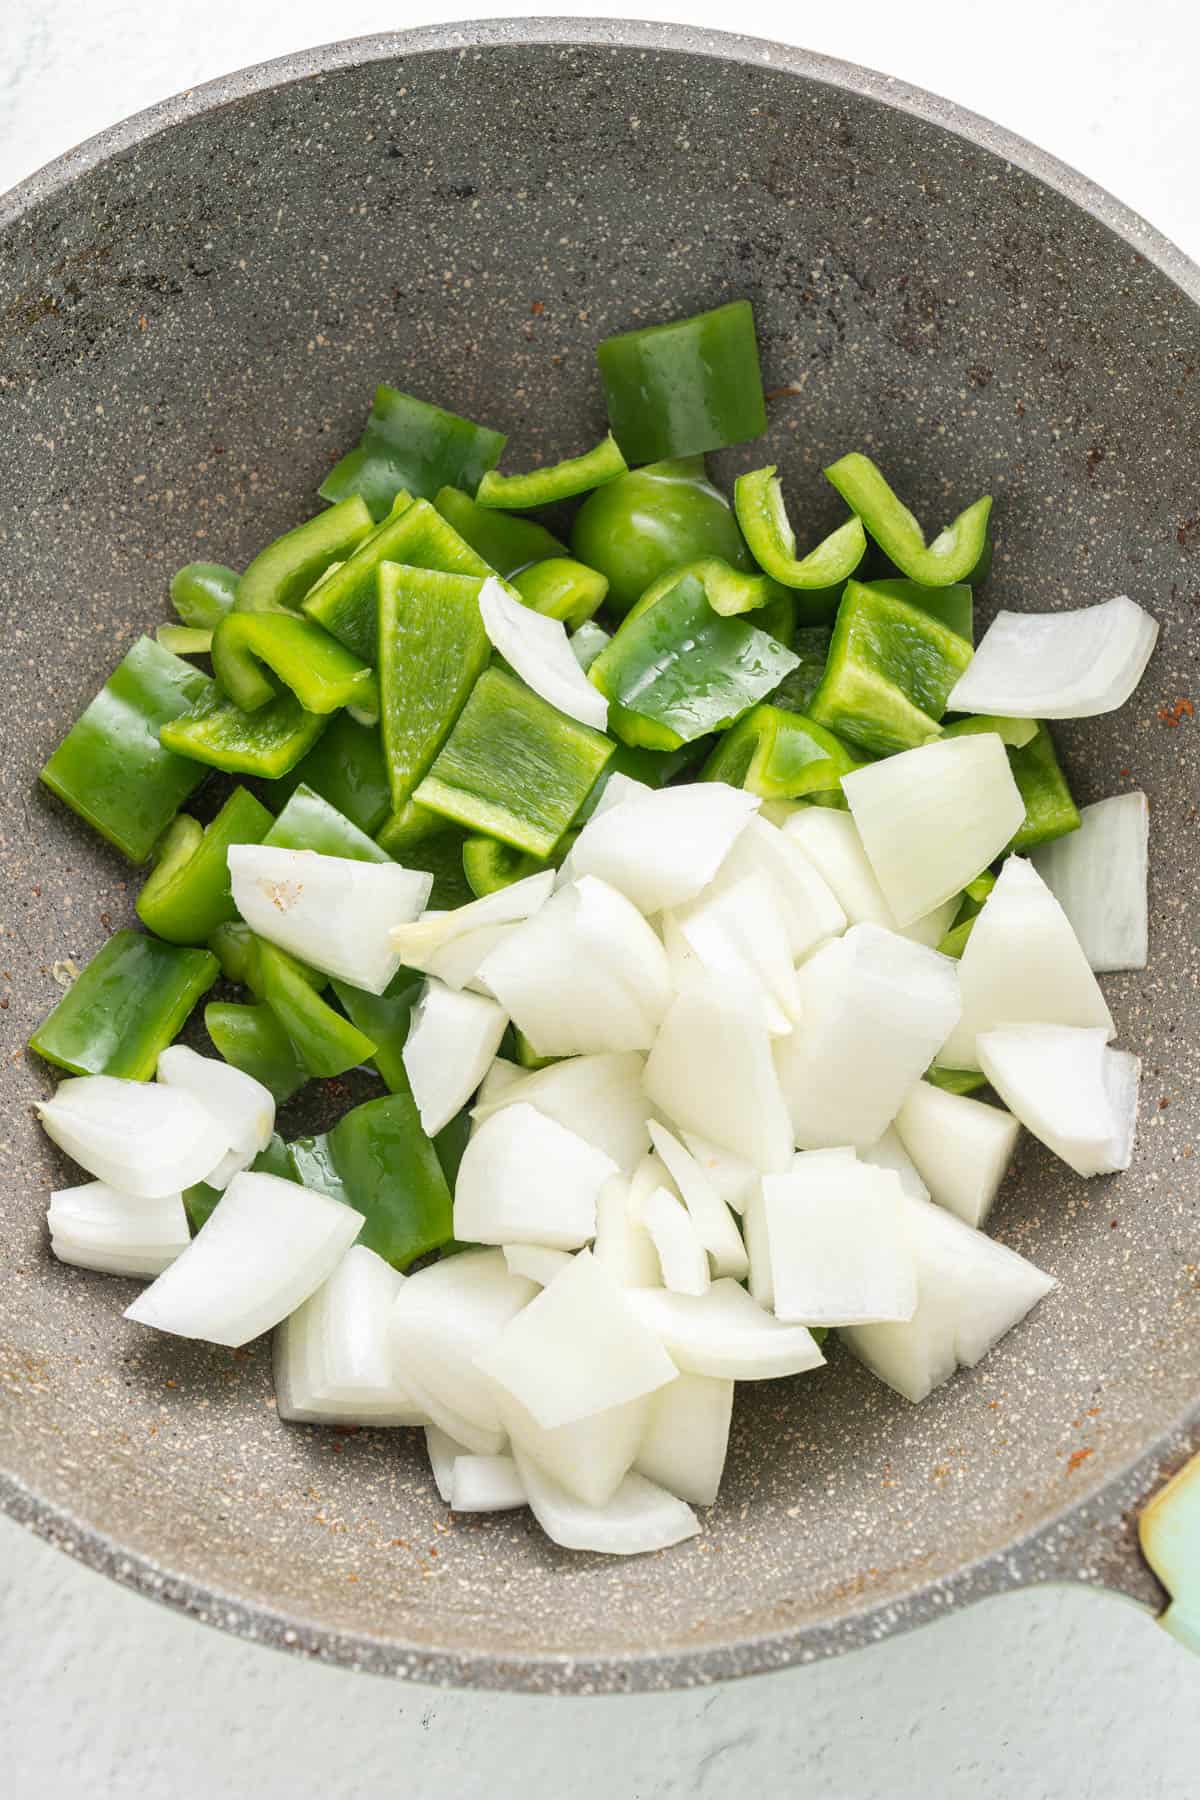 Chopped onion and green pepper in a large pan.